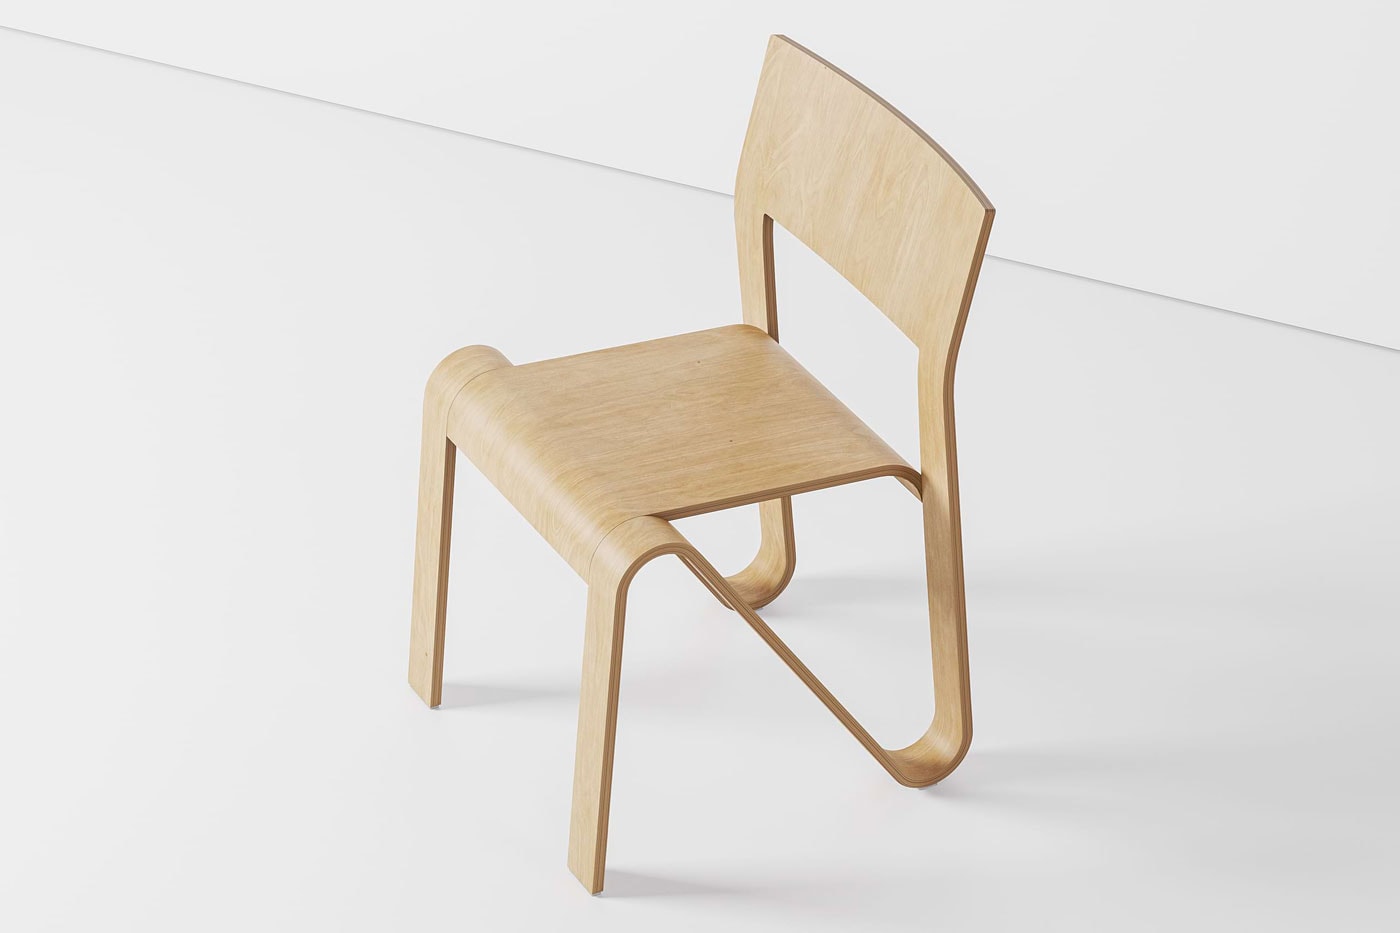 Blond's "Peel Chair" is Constructed From a Single Piece of Plywood